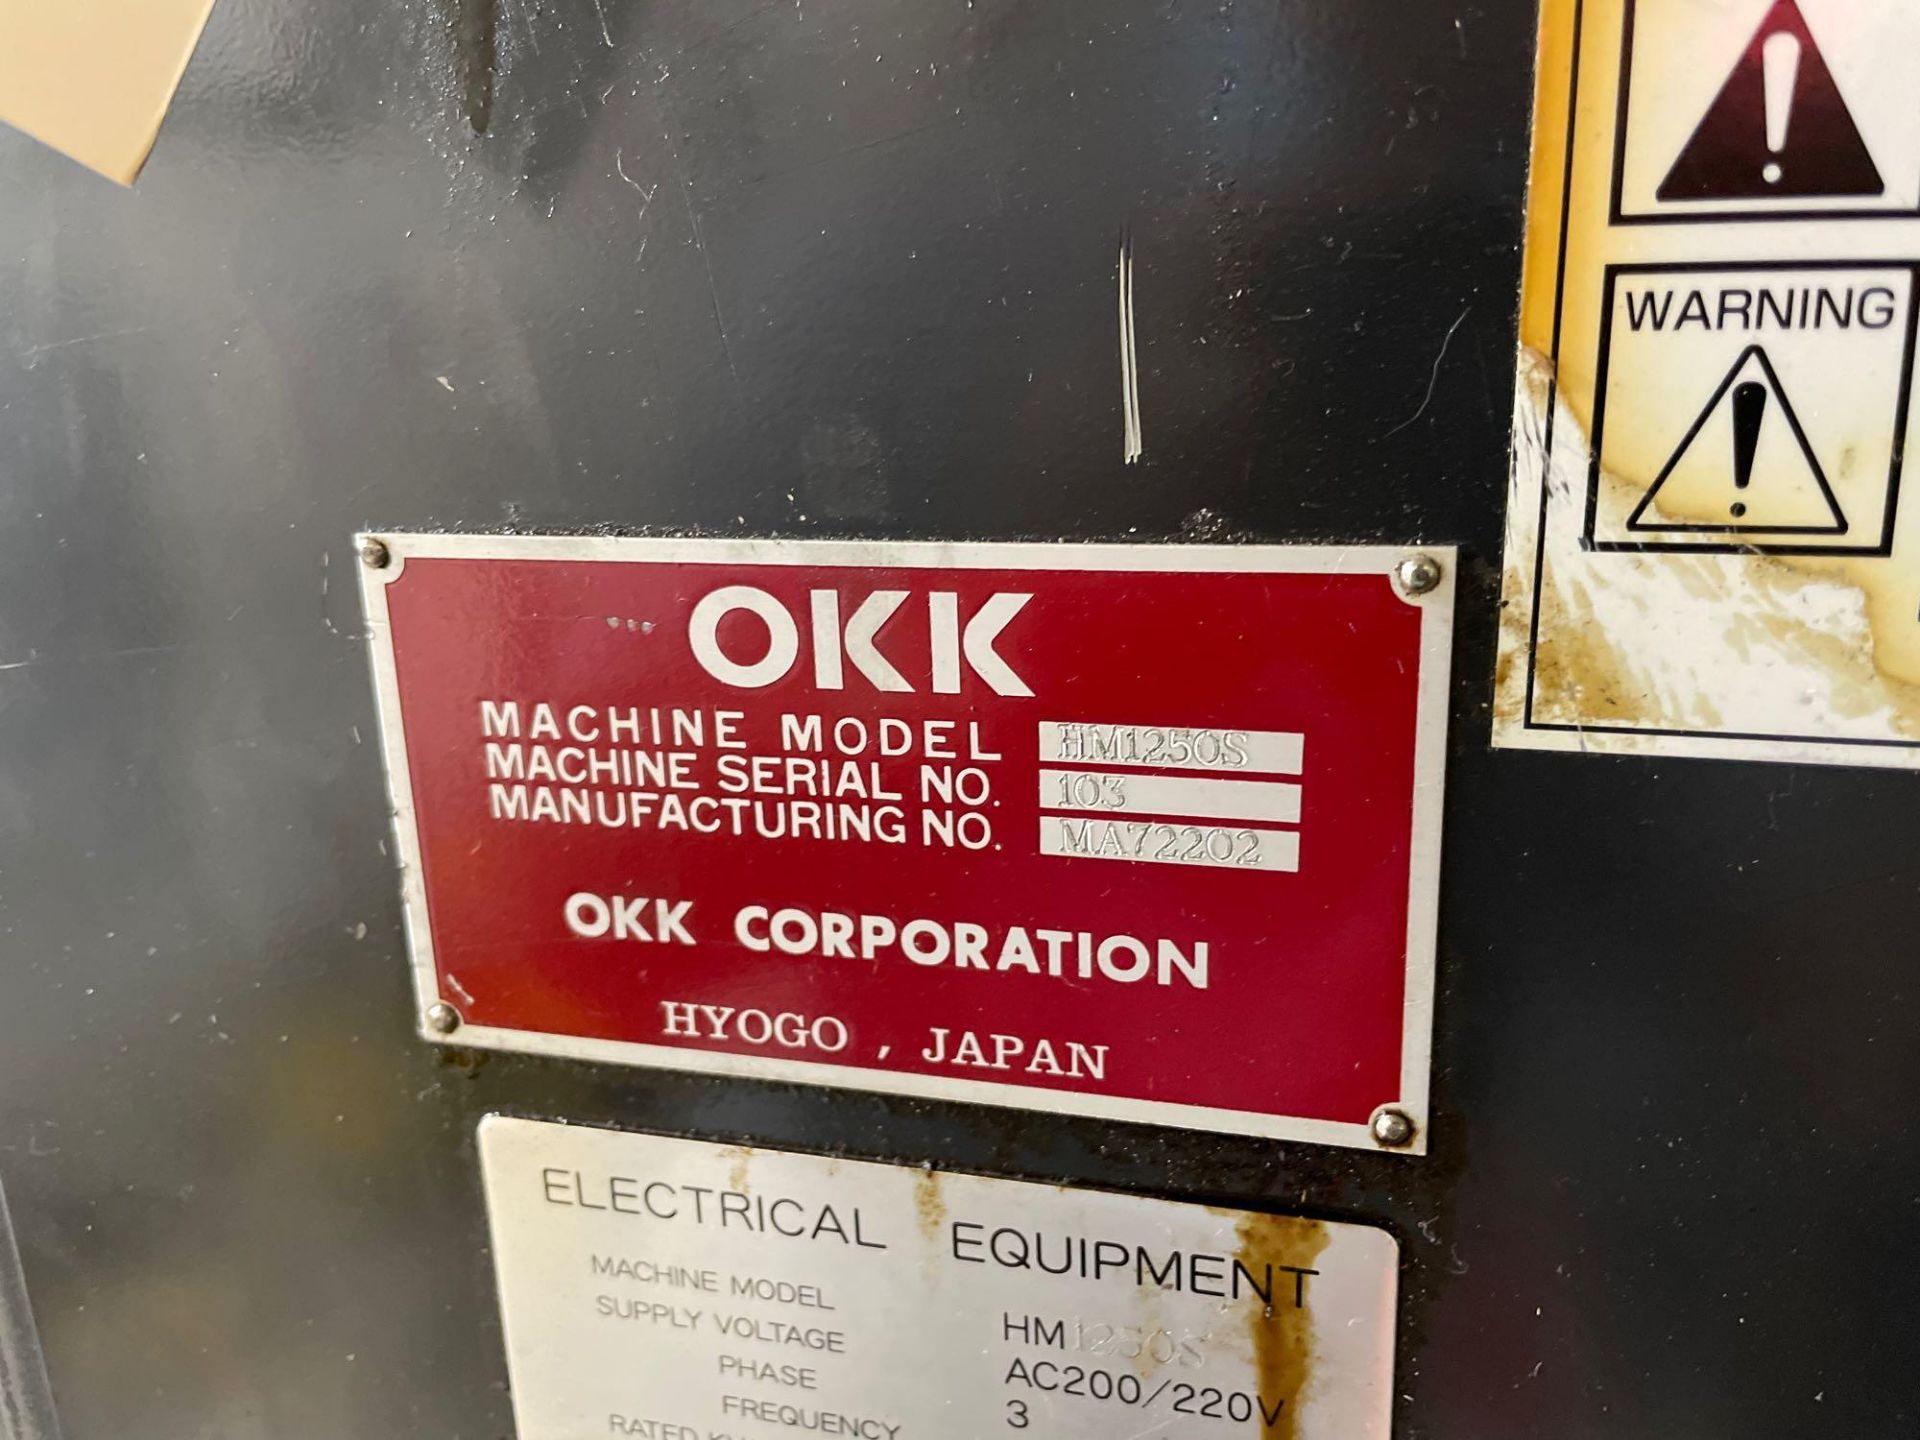 OKK HM1250S 4-Axis, Fanuc 310iS Model A ctrl, 49.2" pllts, 8k RPM, CT50, 80 ATC, CTS, s/n 103 - Image 14 of 18